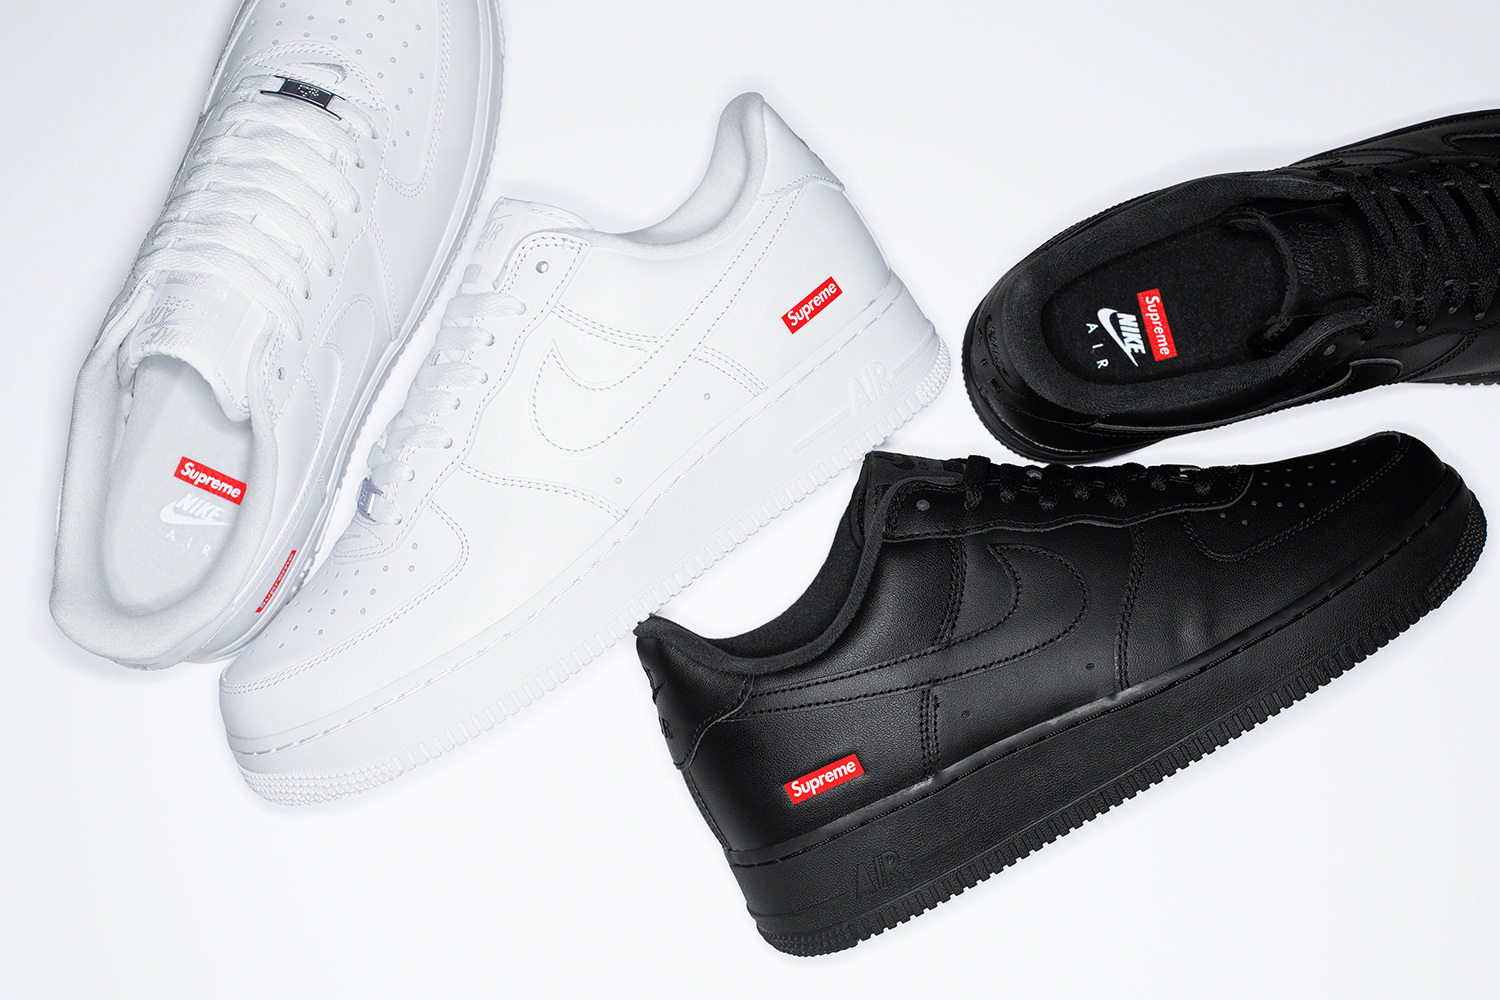 Supreme x Nike Air Force 1 Low SS20